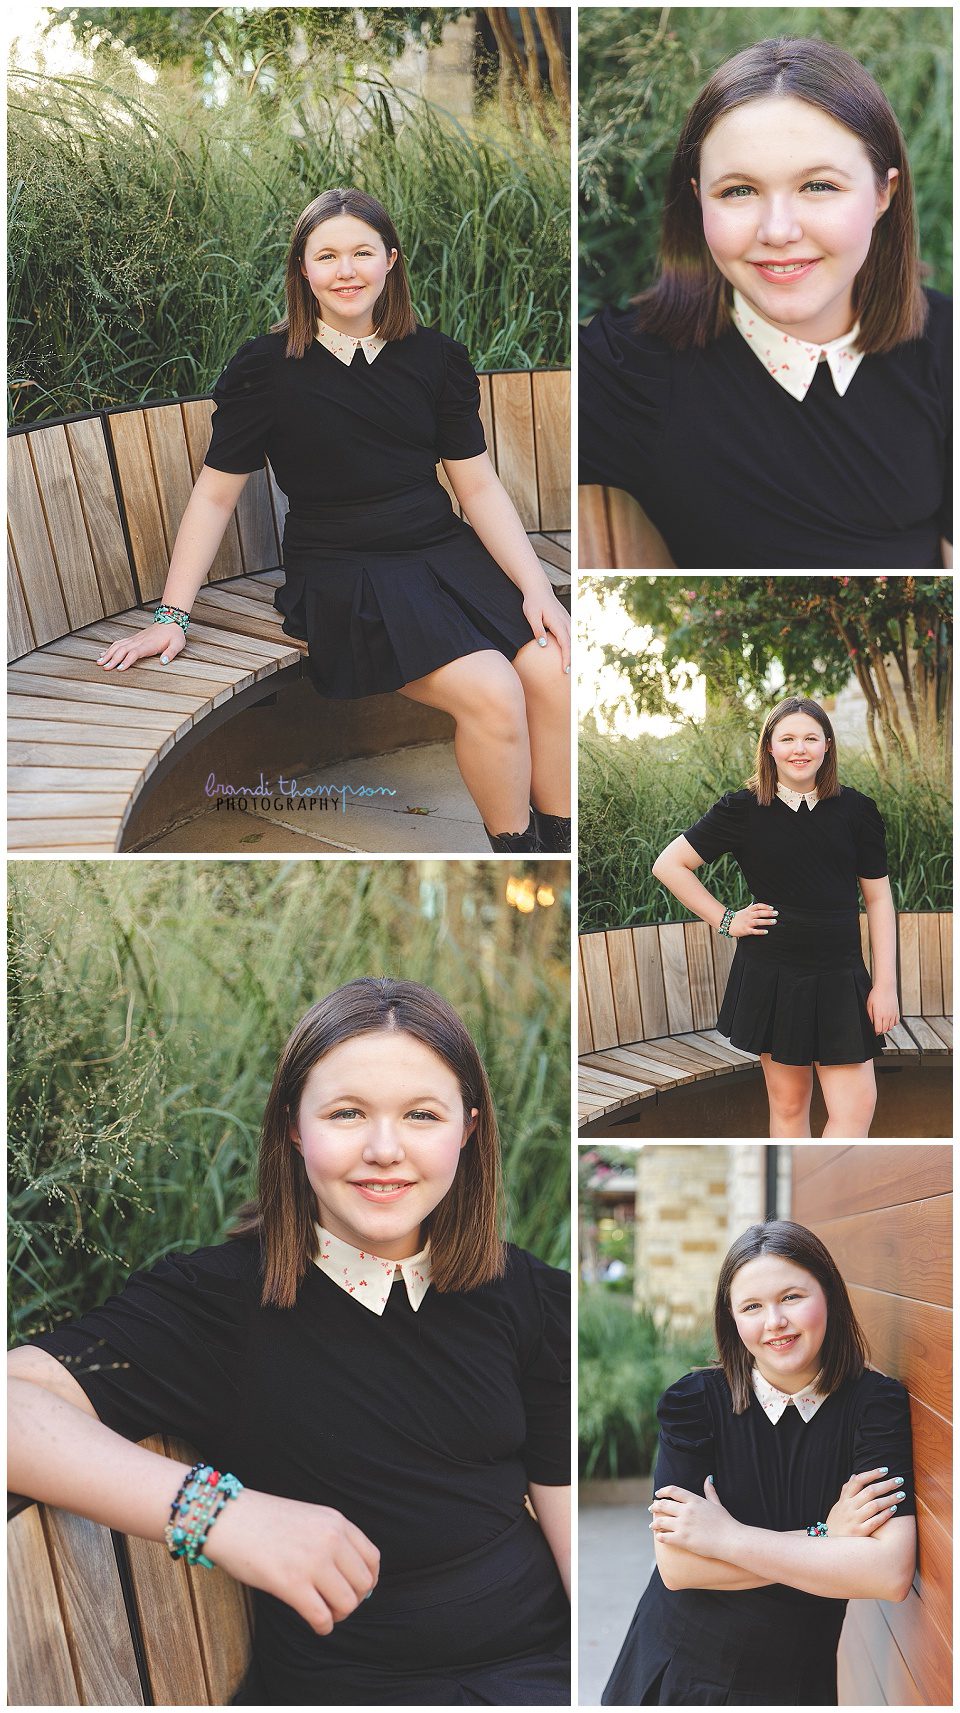 Photo collage of a light skinned tween girl with shoulder length brown hair and wearing a black outfit with white collar